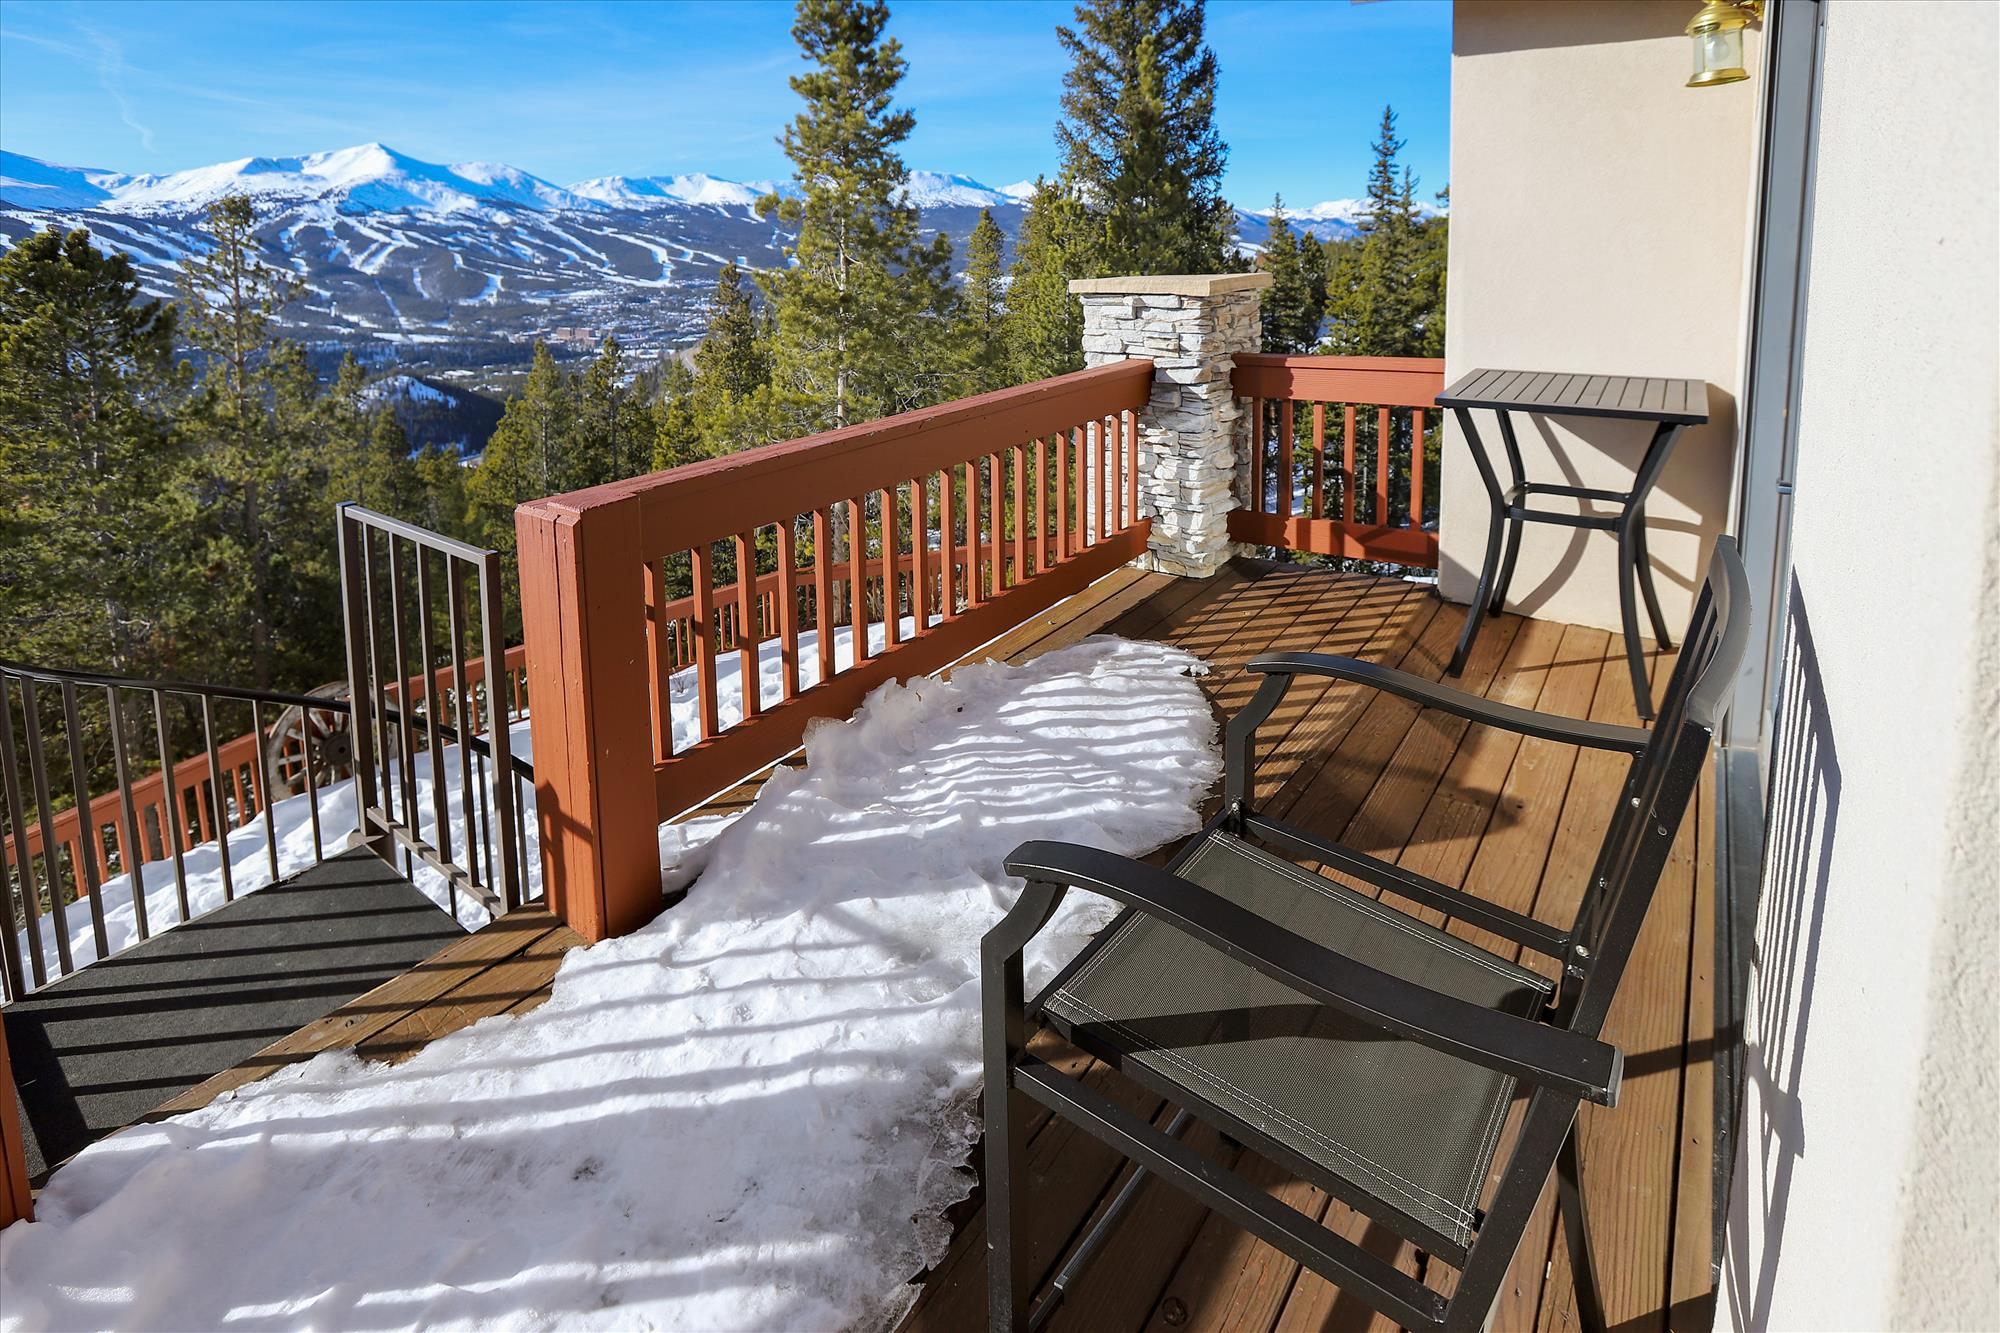 Sit on the deck in the mornings and have a cup of coffee while taking the breathtaking views.